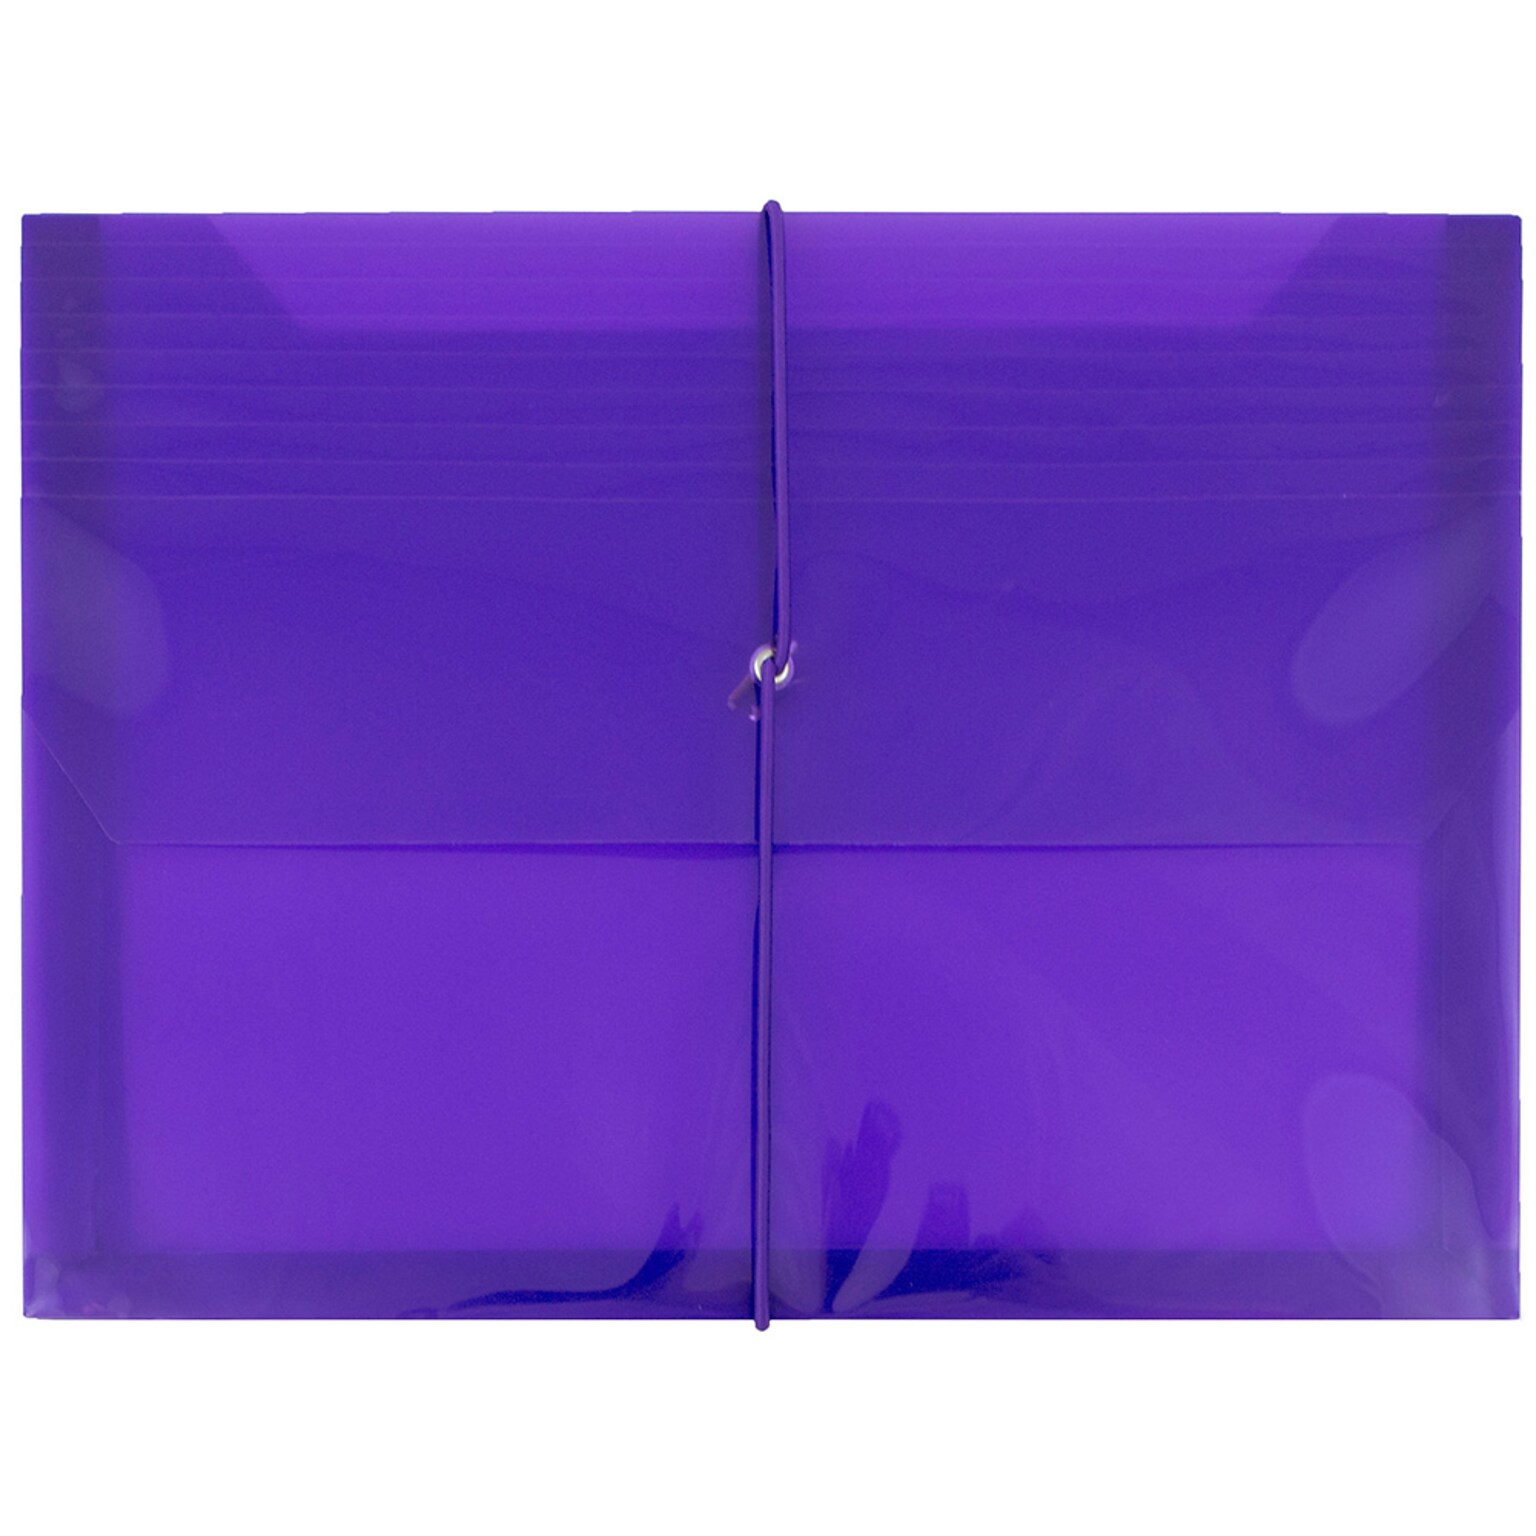 JAM Paper® Plastic Envelopes with Elastic Band Closure, 9.75 x 13 with 2.625 Inch Expansion, Purple, 12/Pack (218E25PUB)